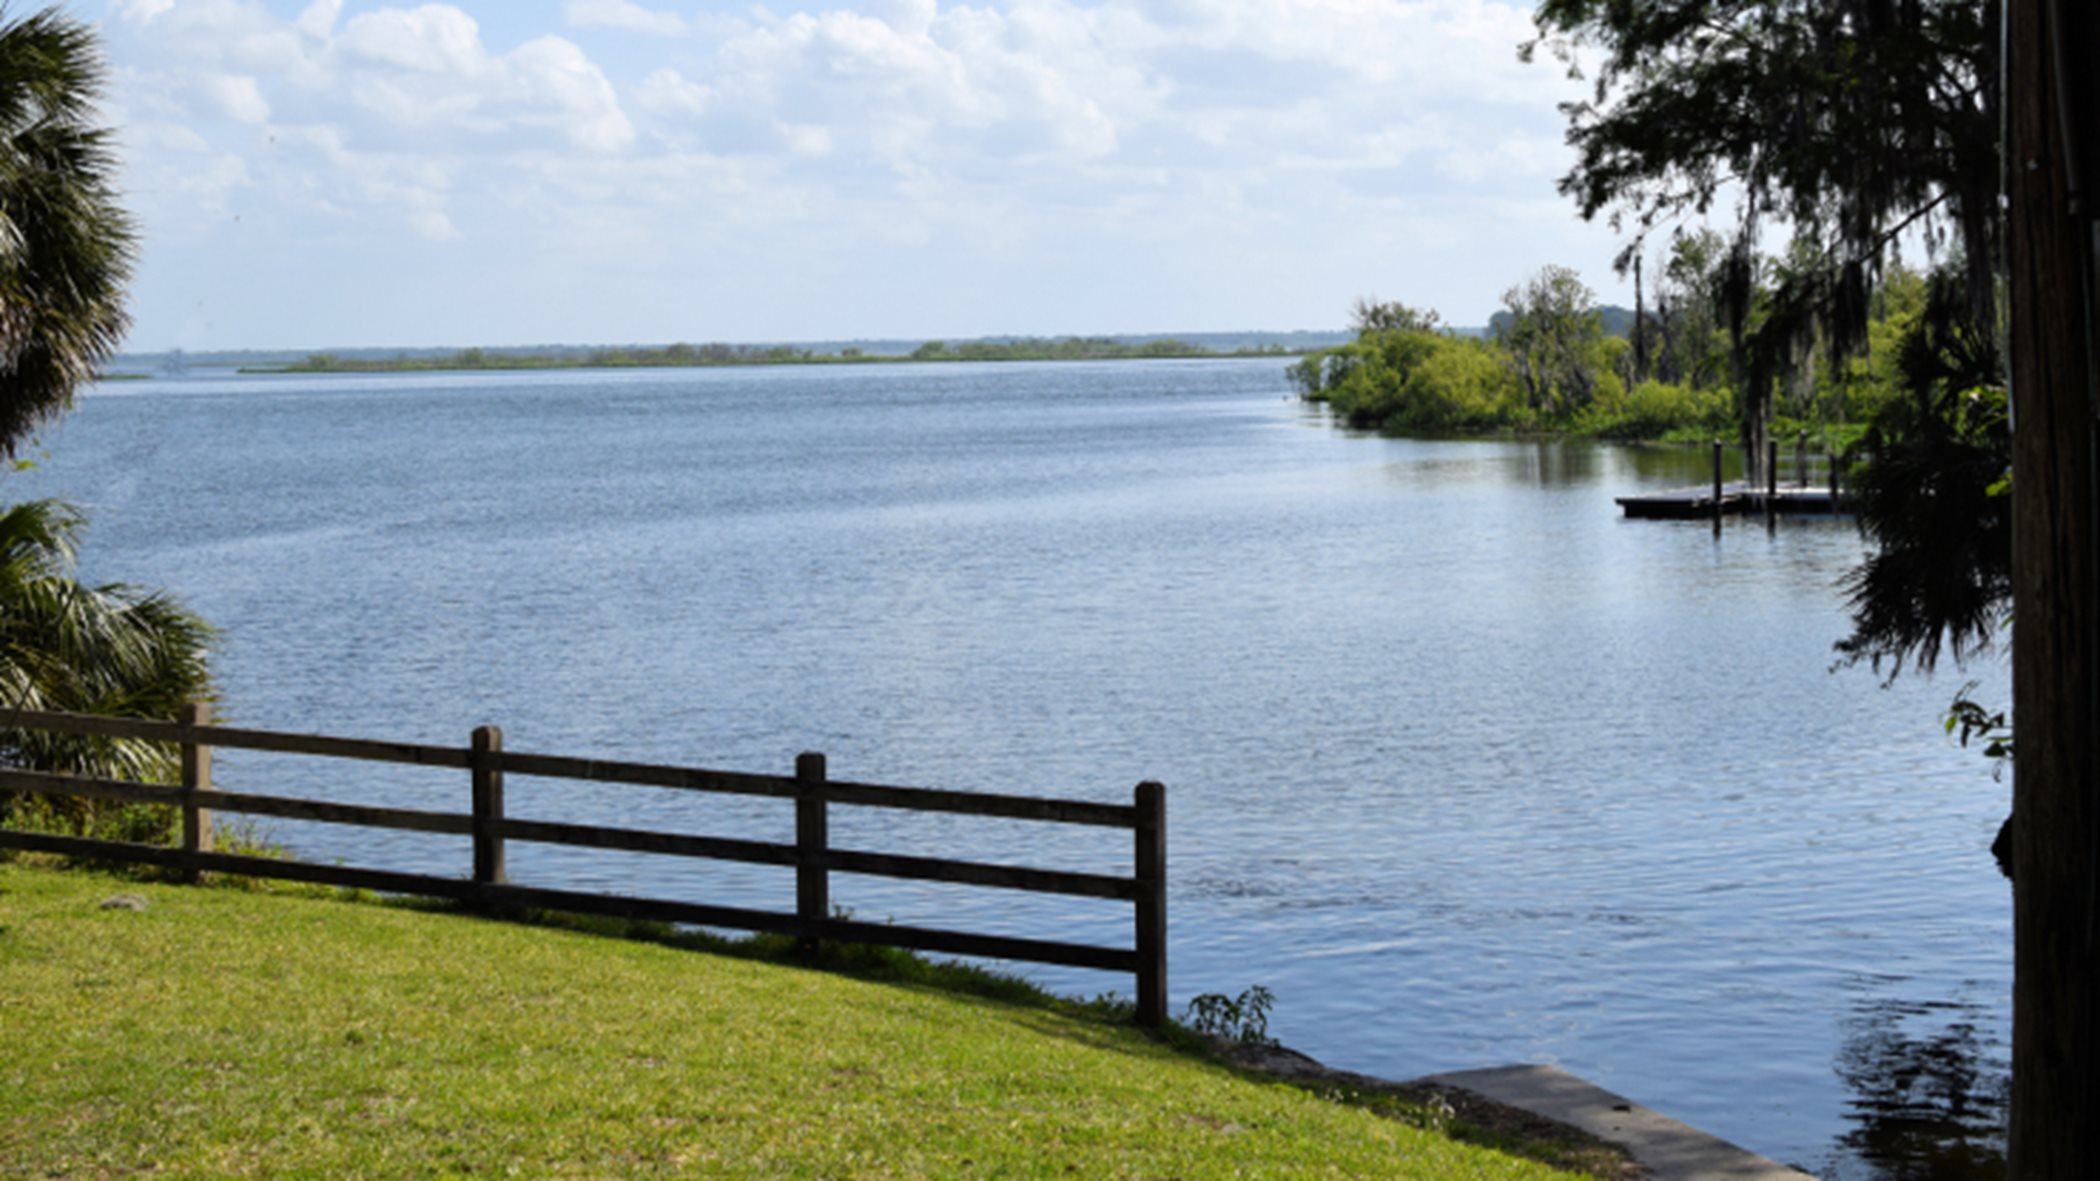 Viewpoint of Ocala waters